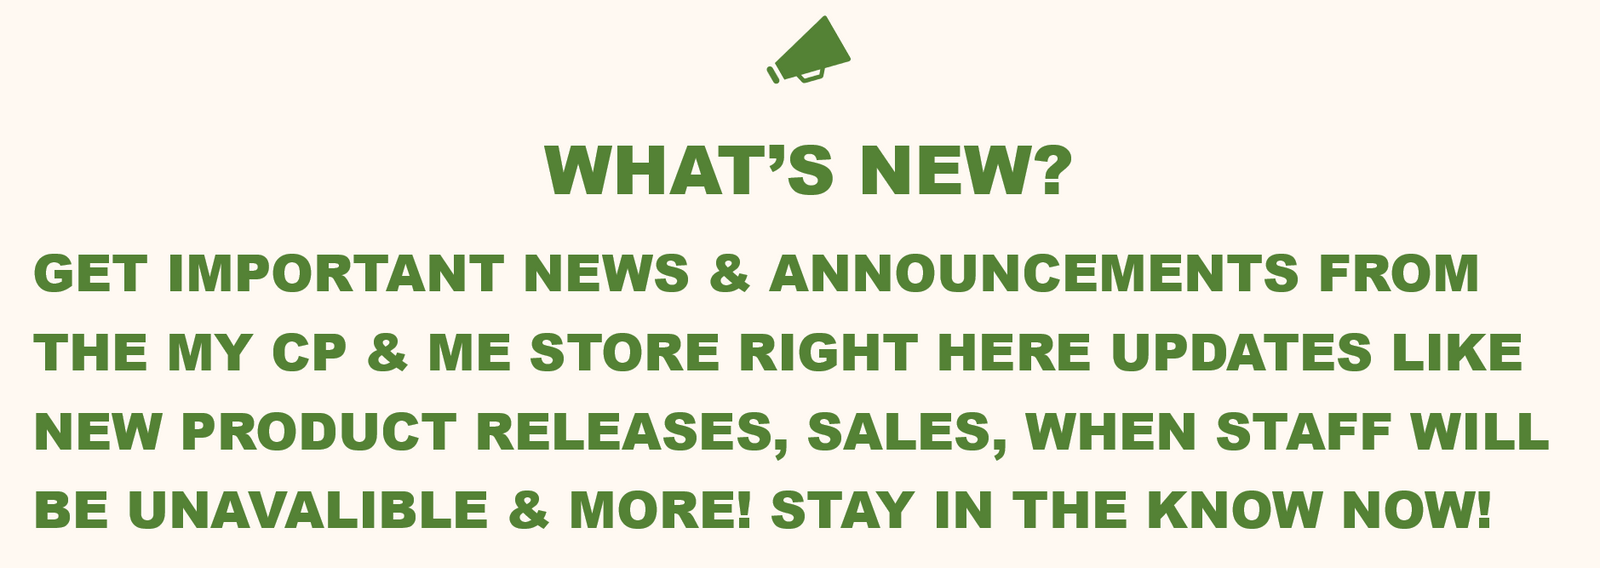 Announcement icon then text that reads What’s new? Get important news and announcements from the my cp and me store right here updates like new product releases, sales, when staff will be unavailable and more! Stay in the know now!